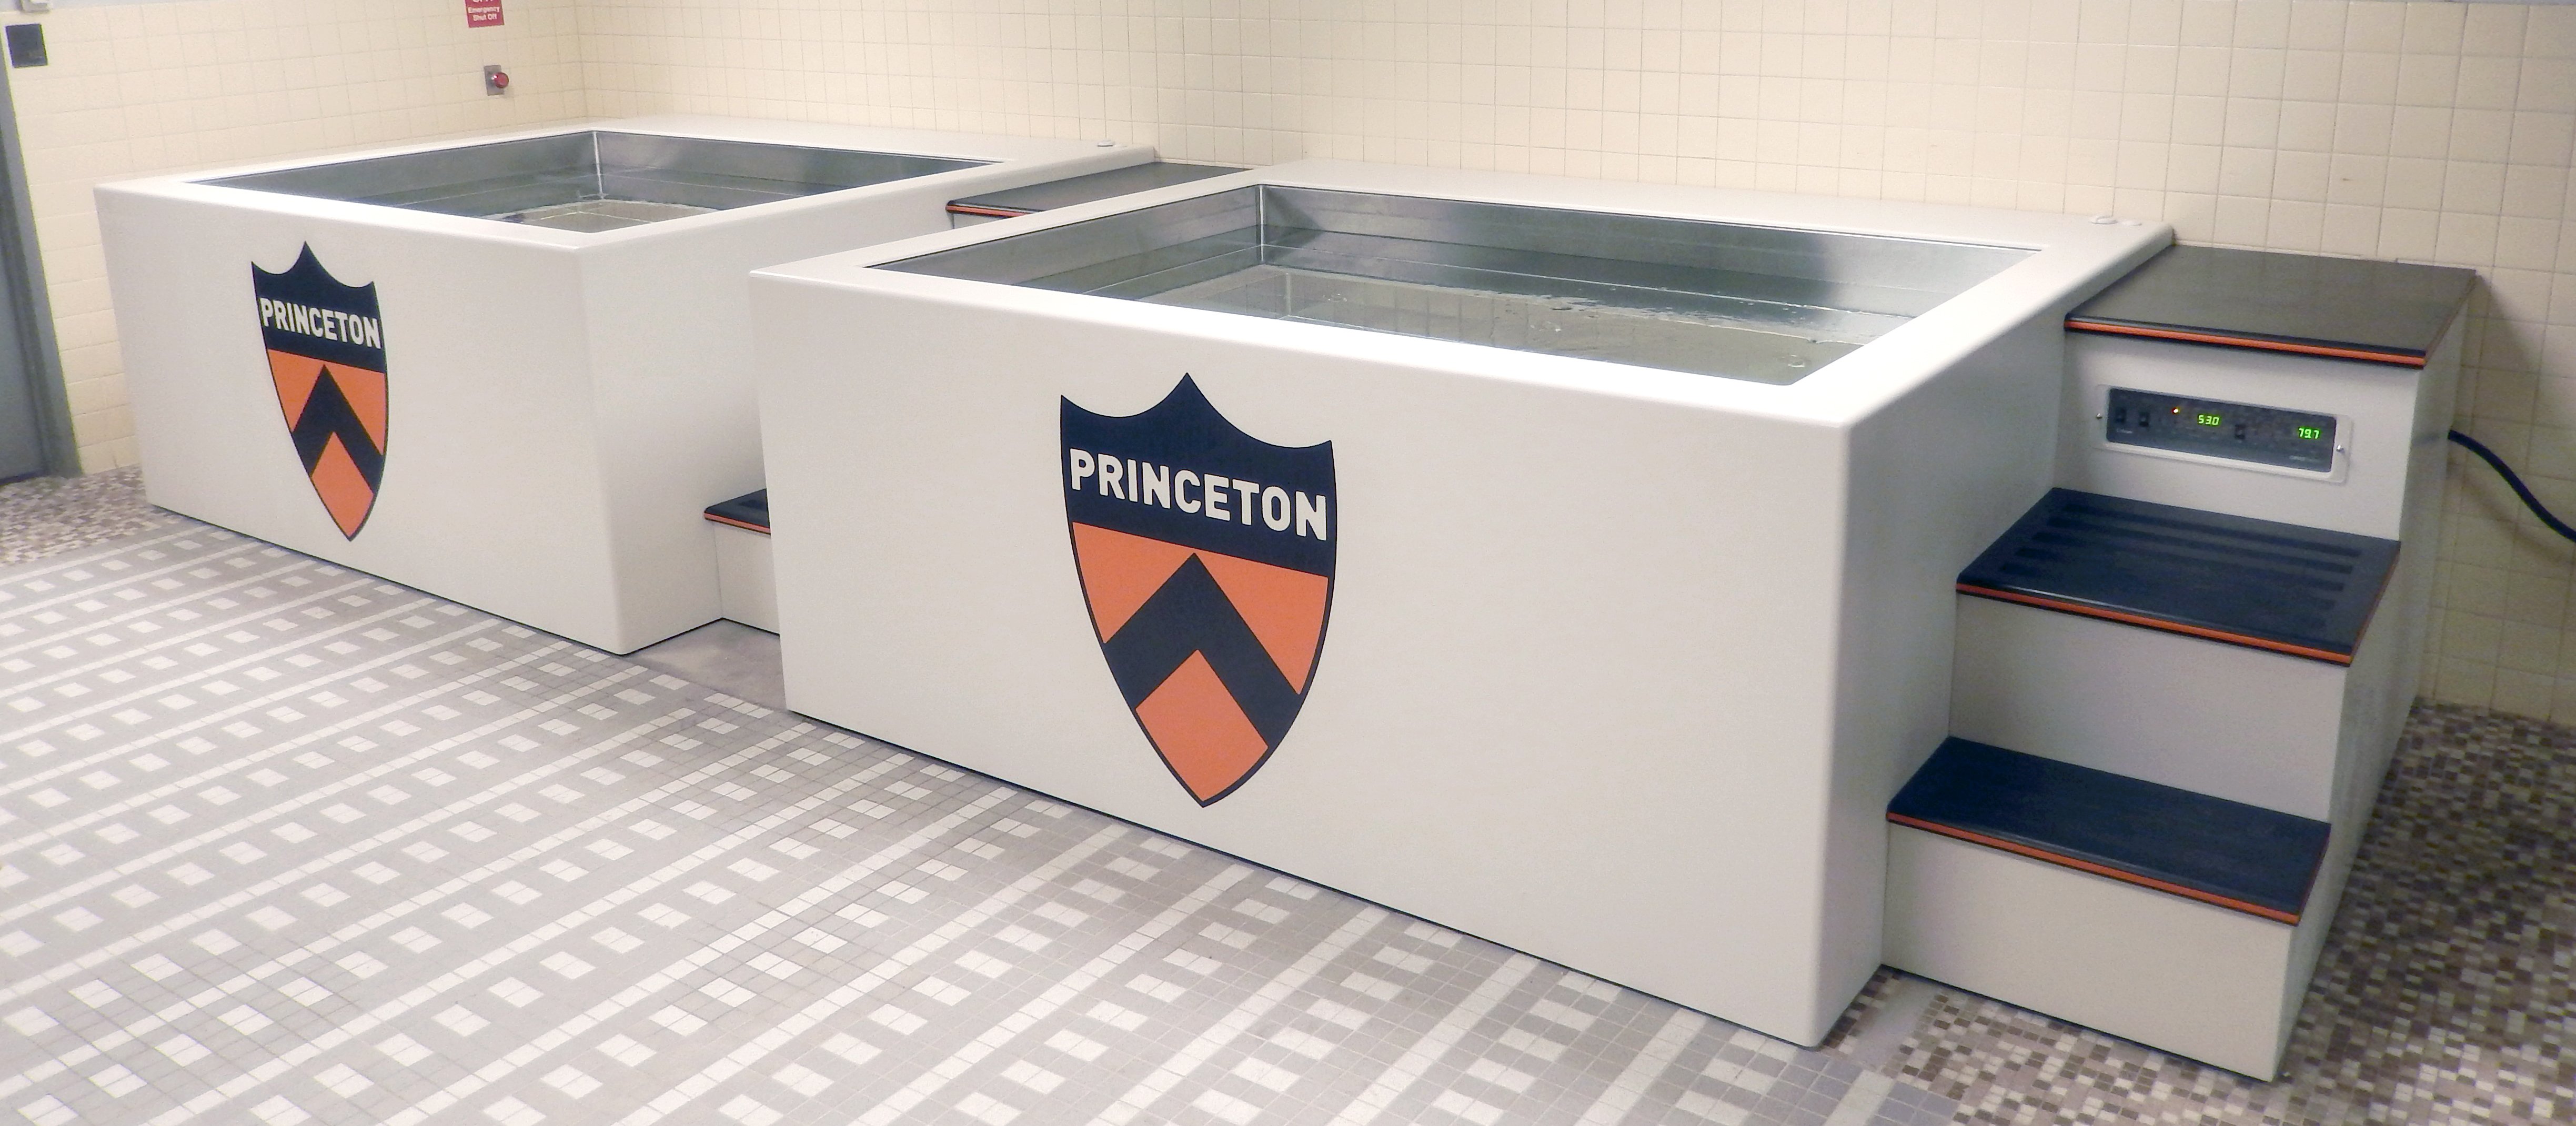 Princeton University CustomFit CRYOTherm hydrotherapy system grimm scientific industries